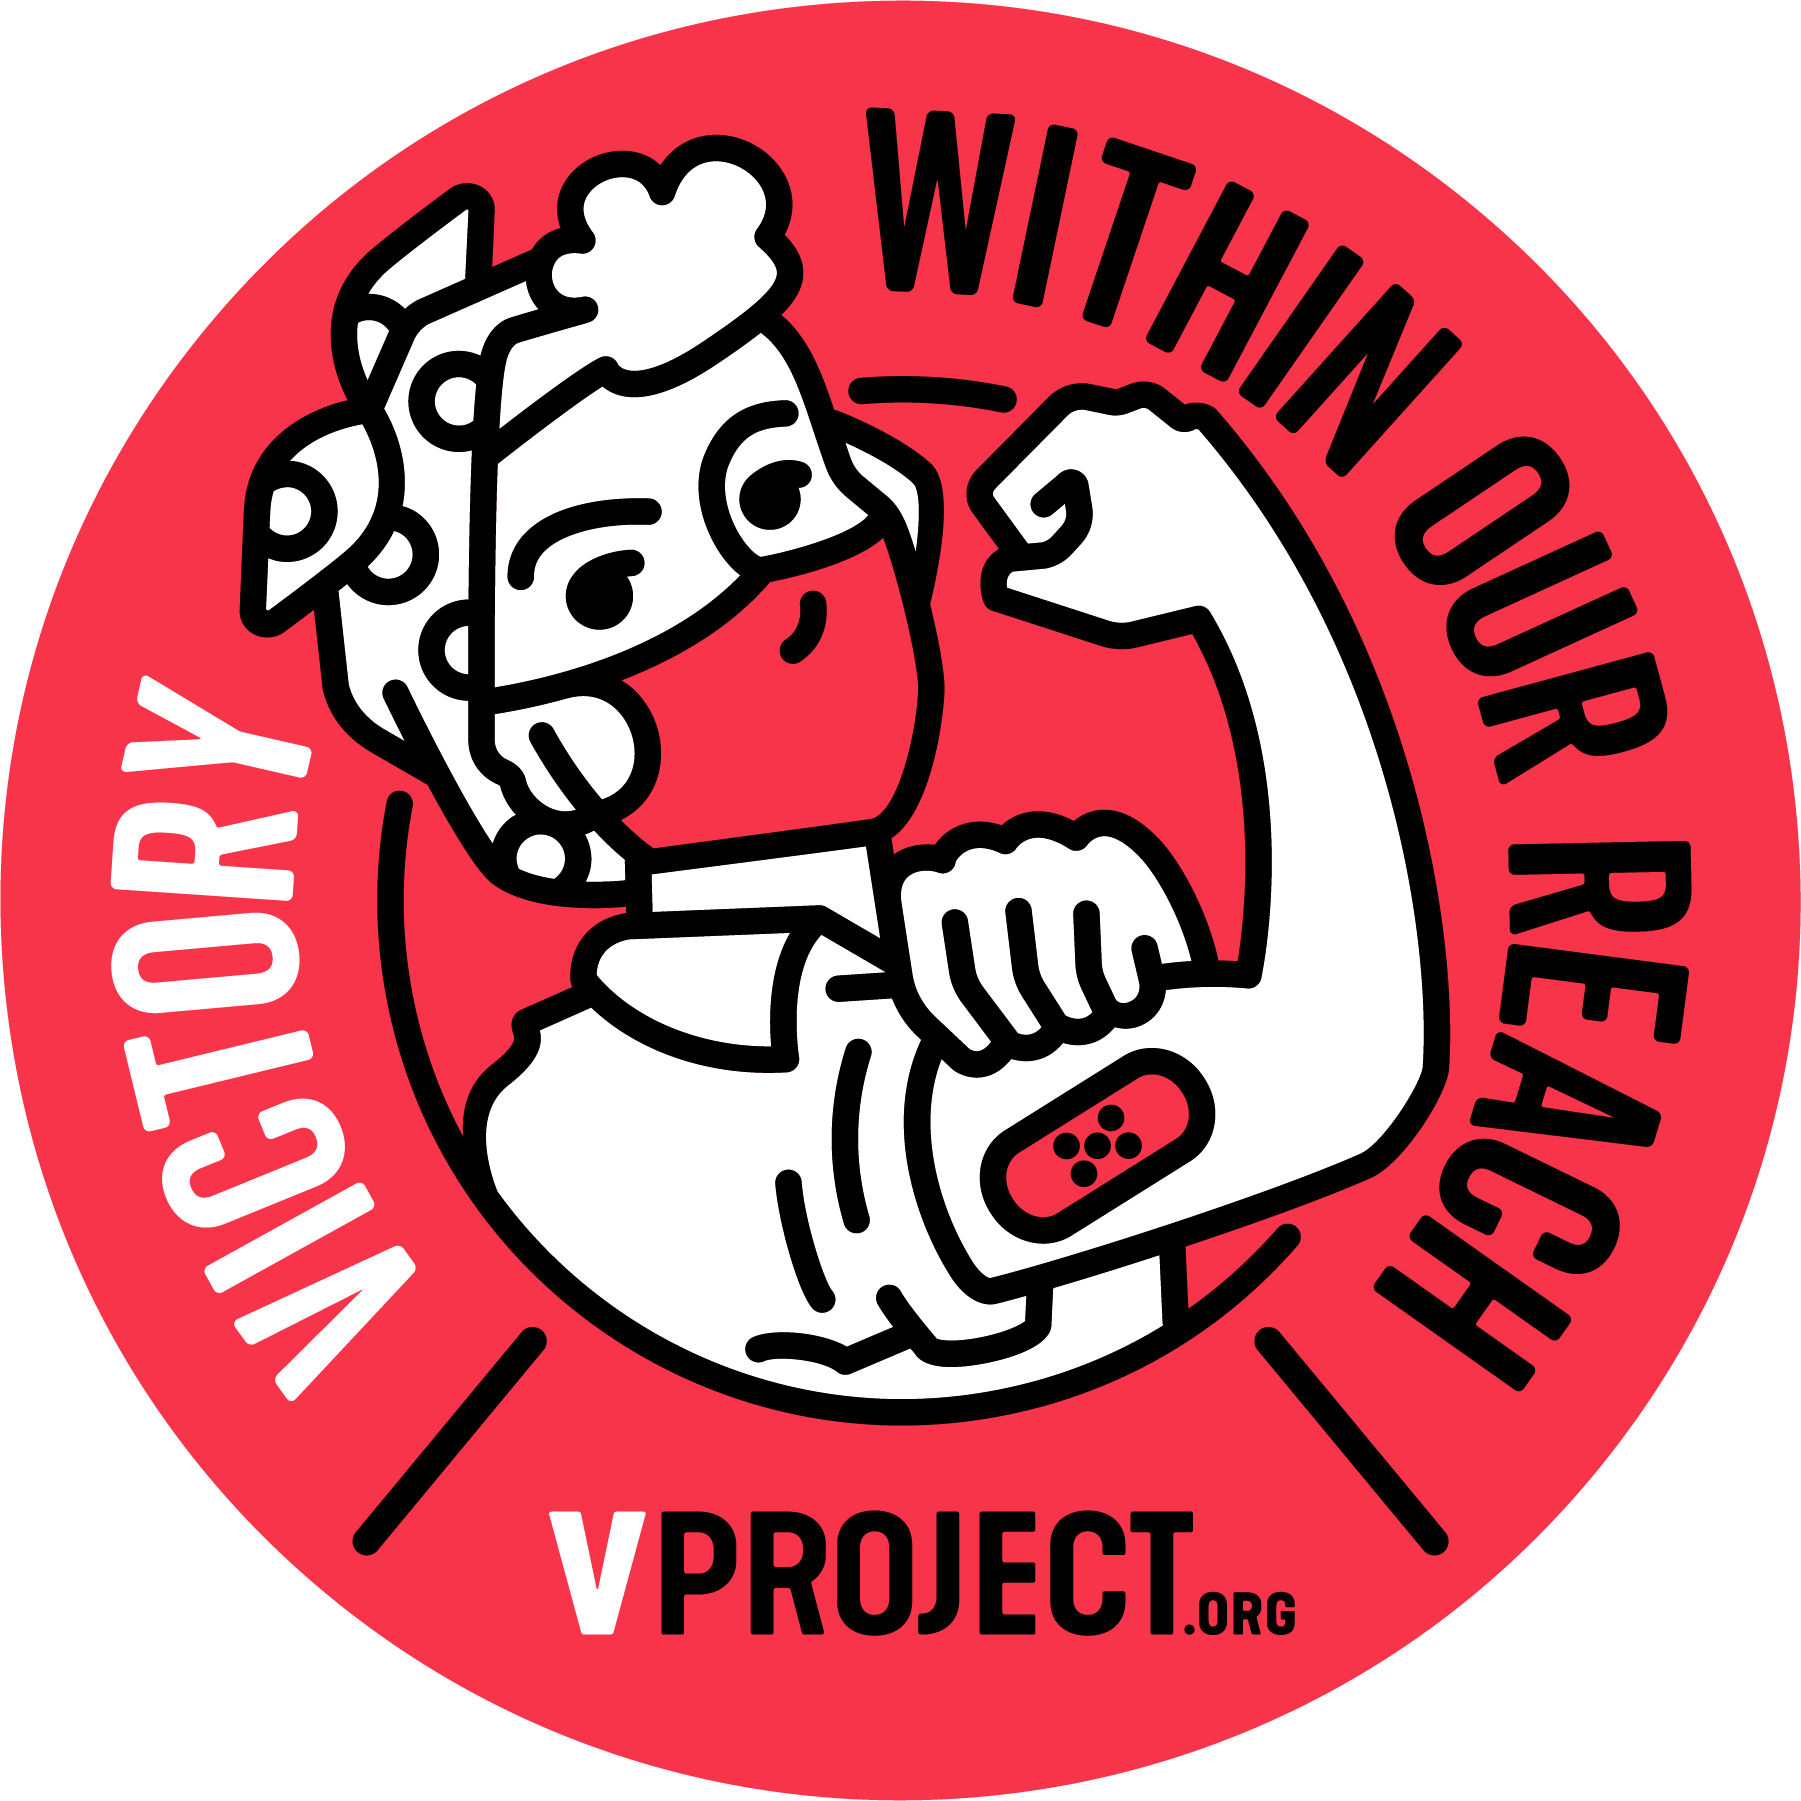 VProject Logo - Victory over COVID-19 through Vaccination